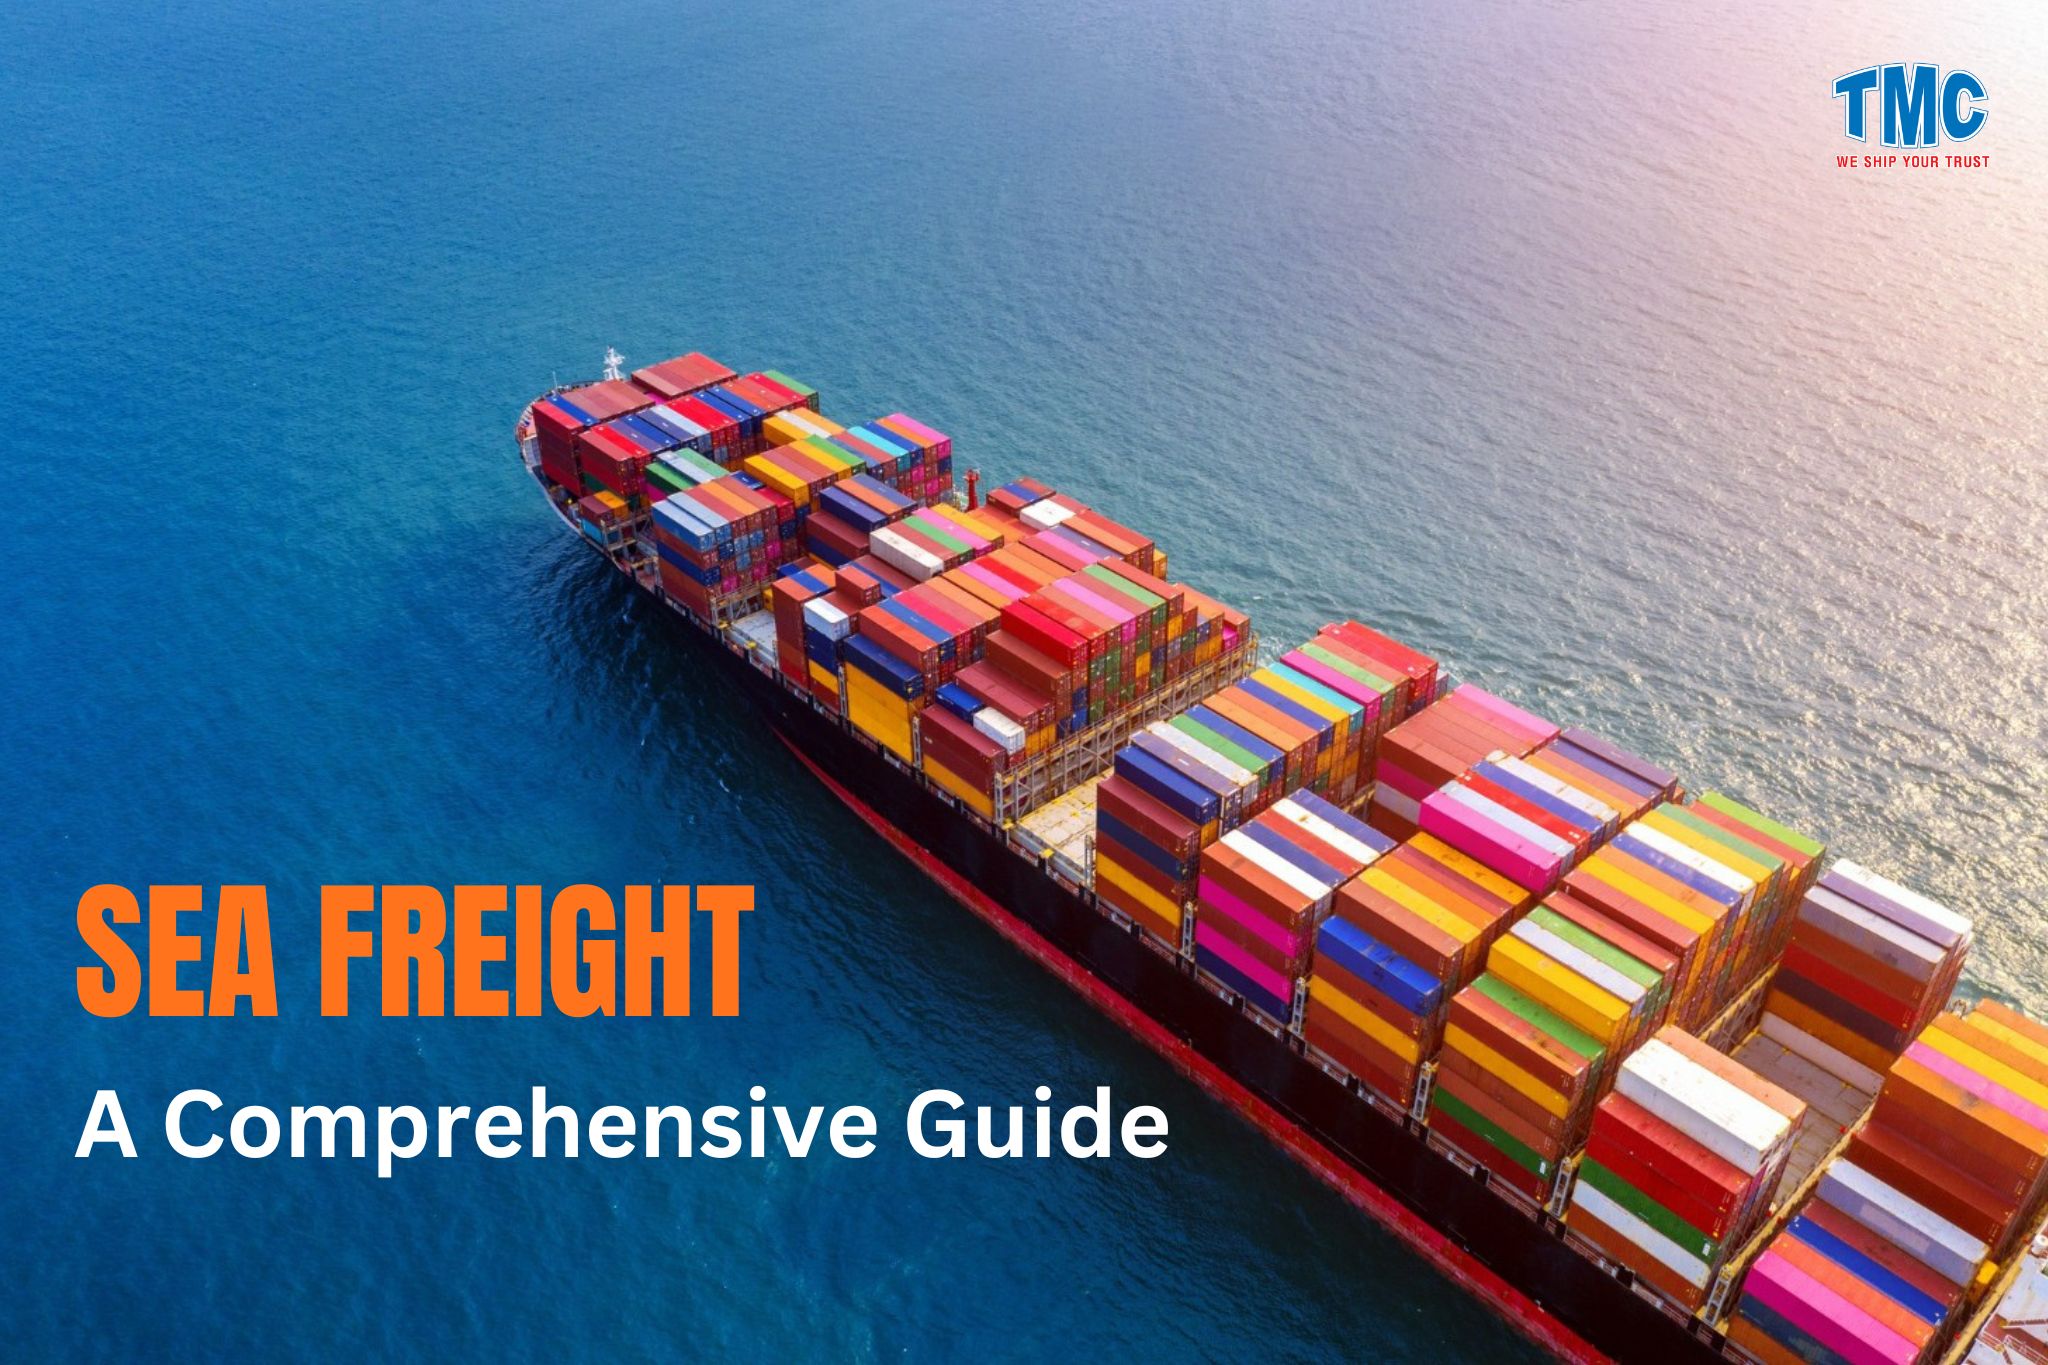 Sea Freight: A Comprehensive Guide